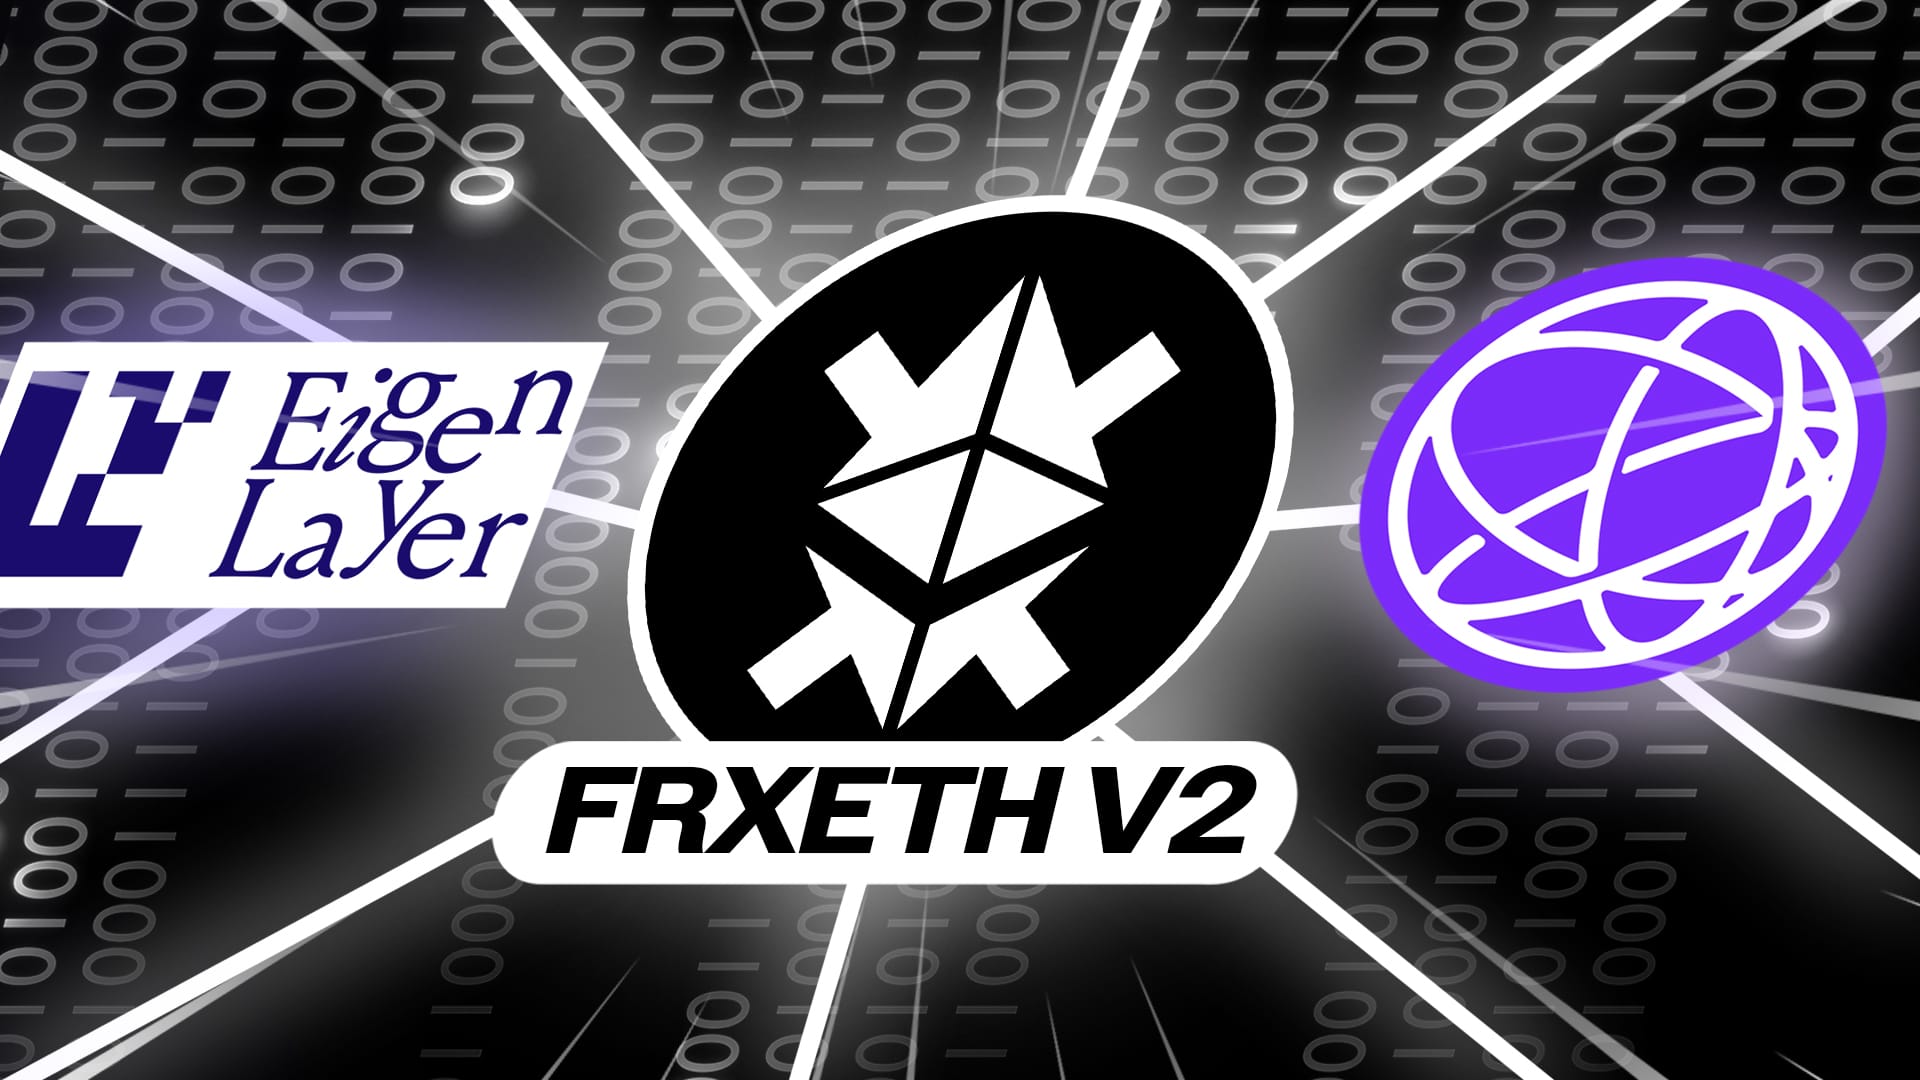 How frxETH v2 Stands to Benefit from Ethereum's Modular Transformation